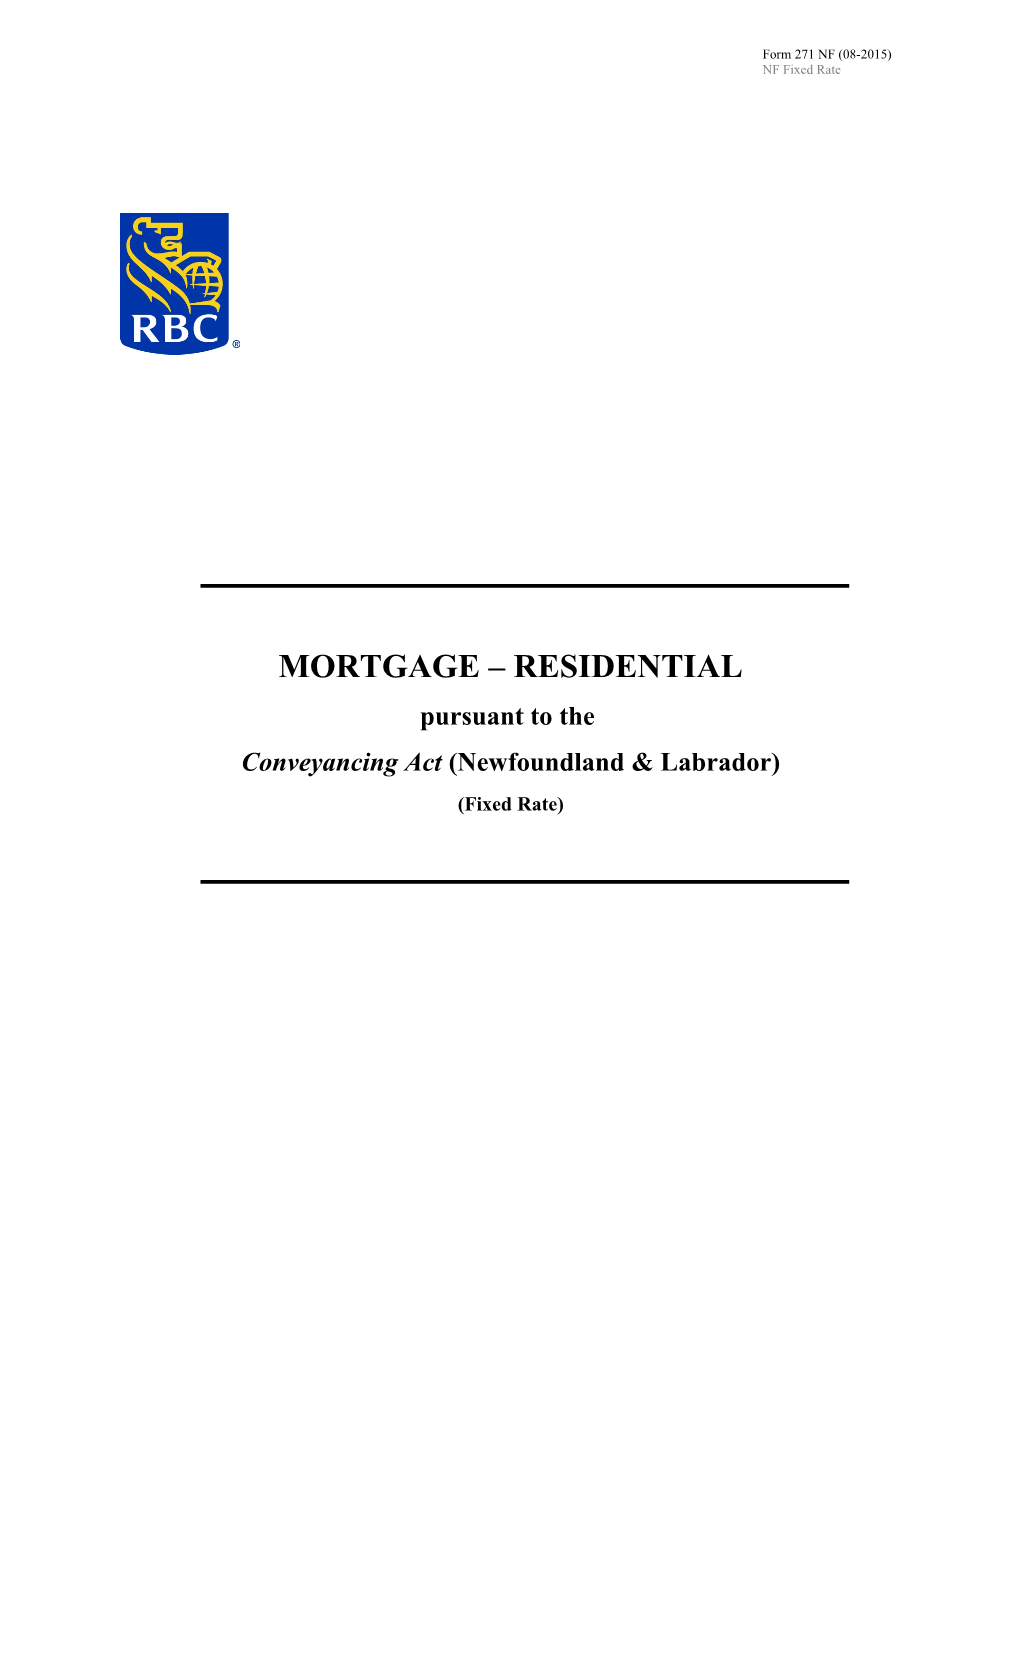 MORTGAGE RESIDENTIAL Pursuant to the Conveyancing Act (Newfoundland & Labrador)